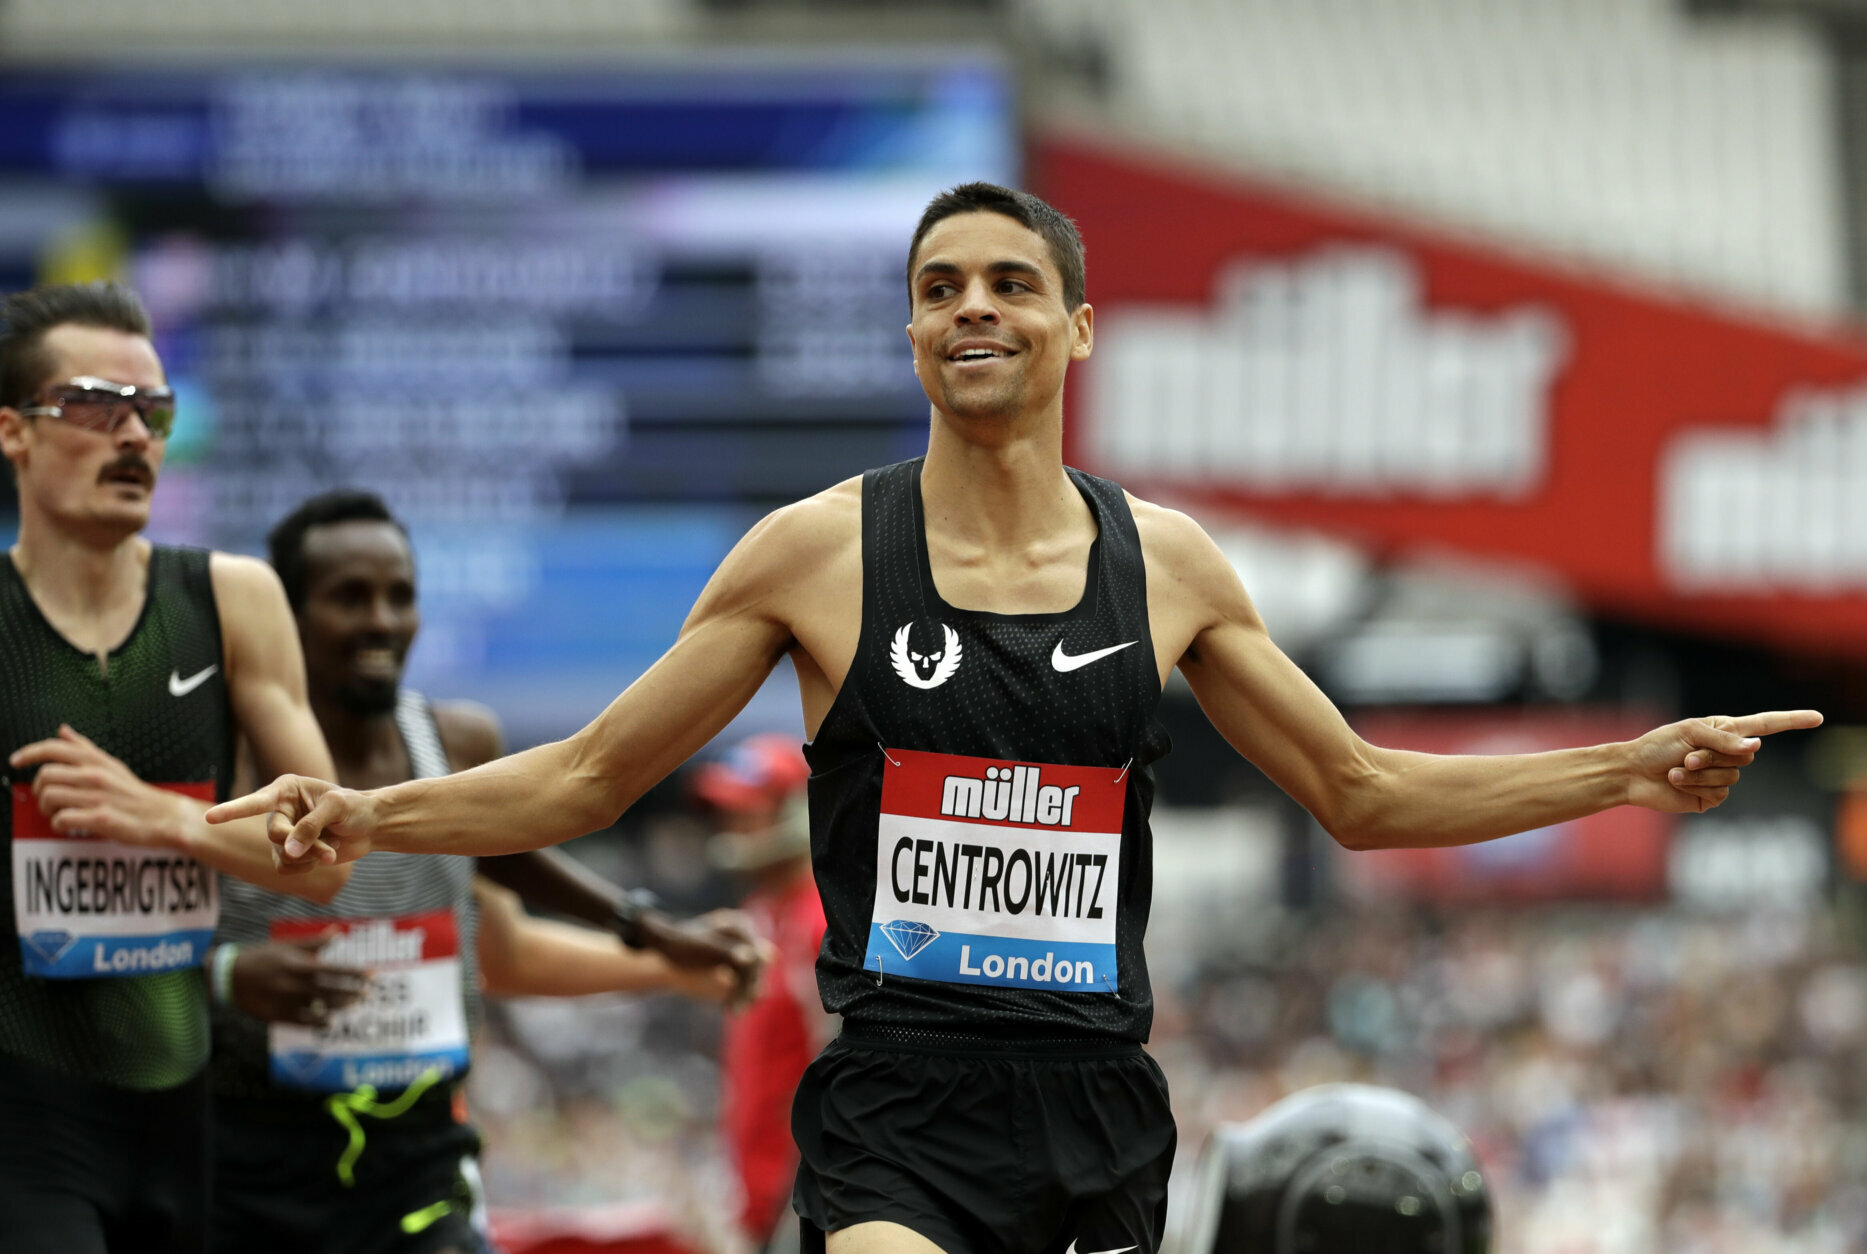 <p><strong>Matthew Centrowitz (Beltsville, Maryland) — Track and Field</strong></p>
<p><strong>Notable facts:</strong> Centrowitz, <a href="https://wtop.com/olympics/2016/08/centrowitz-follows-fathers-footsteps-as-he-looks-to-forge-golden-legacy/" target="_blank" rel="noopener">who was profiled by WTOP in 2016</a>, is making his third trip to the Summer Games and is a second-generation Olympian (his father is two-time Olympian Matt Centrowitz Sr.).</p>
<p>The younger Centrowitz took home a gold medal in the 1,500 meters in Rio five years ago, the first American to do so since 1908. He also came a fraction of a second from a medal in the same race in London in 2012.</p>
<p><strong>Competition:</strong> Men&#8217;s 1,500 — Aug. 7</p>
